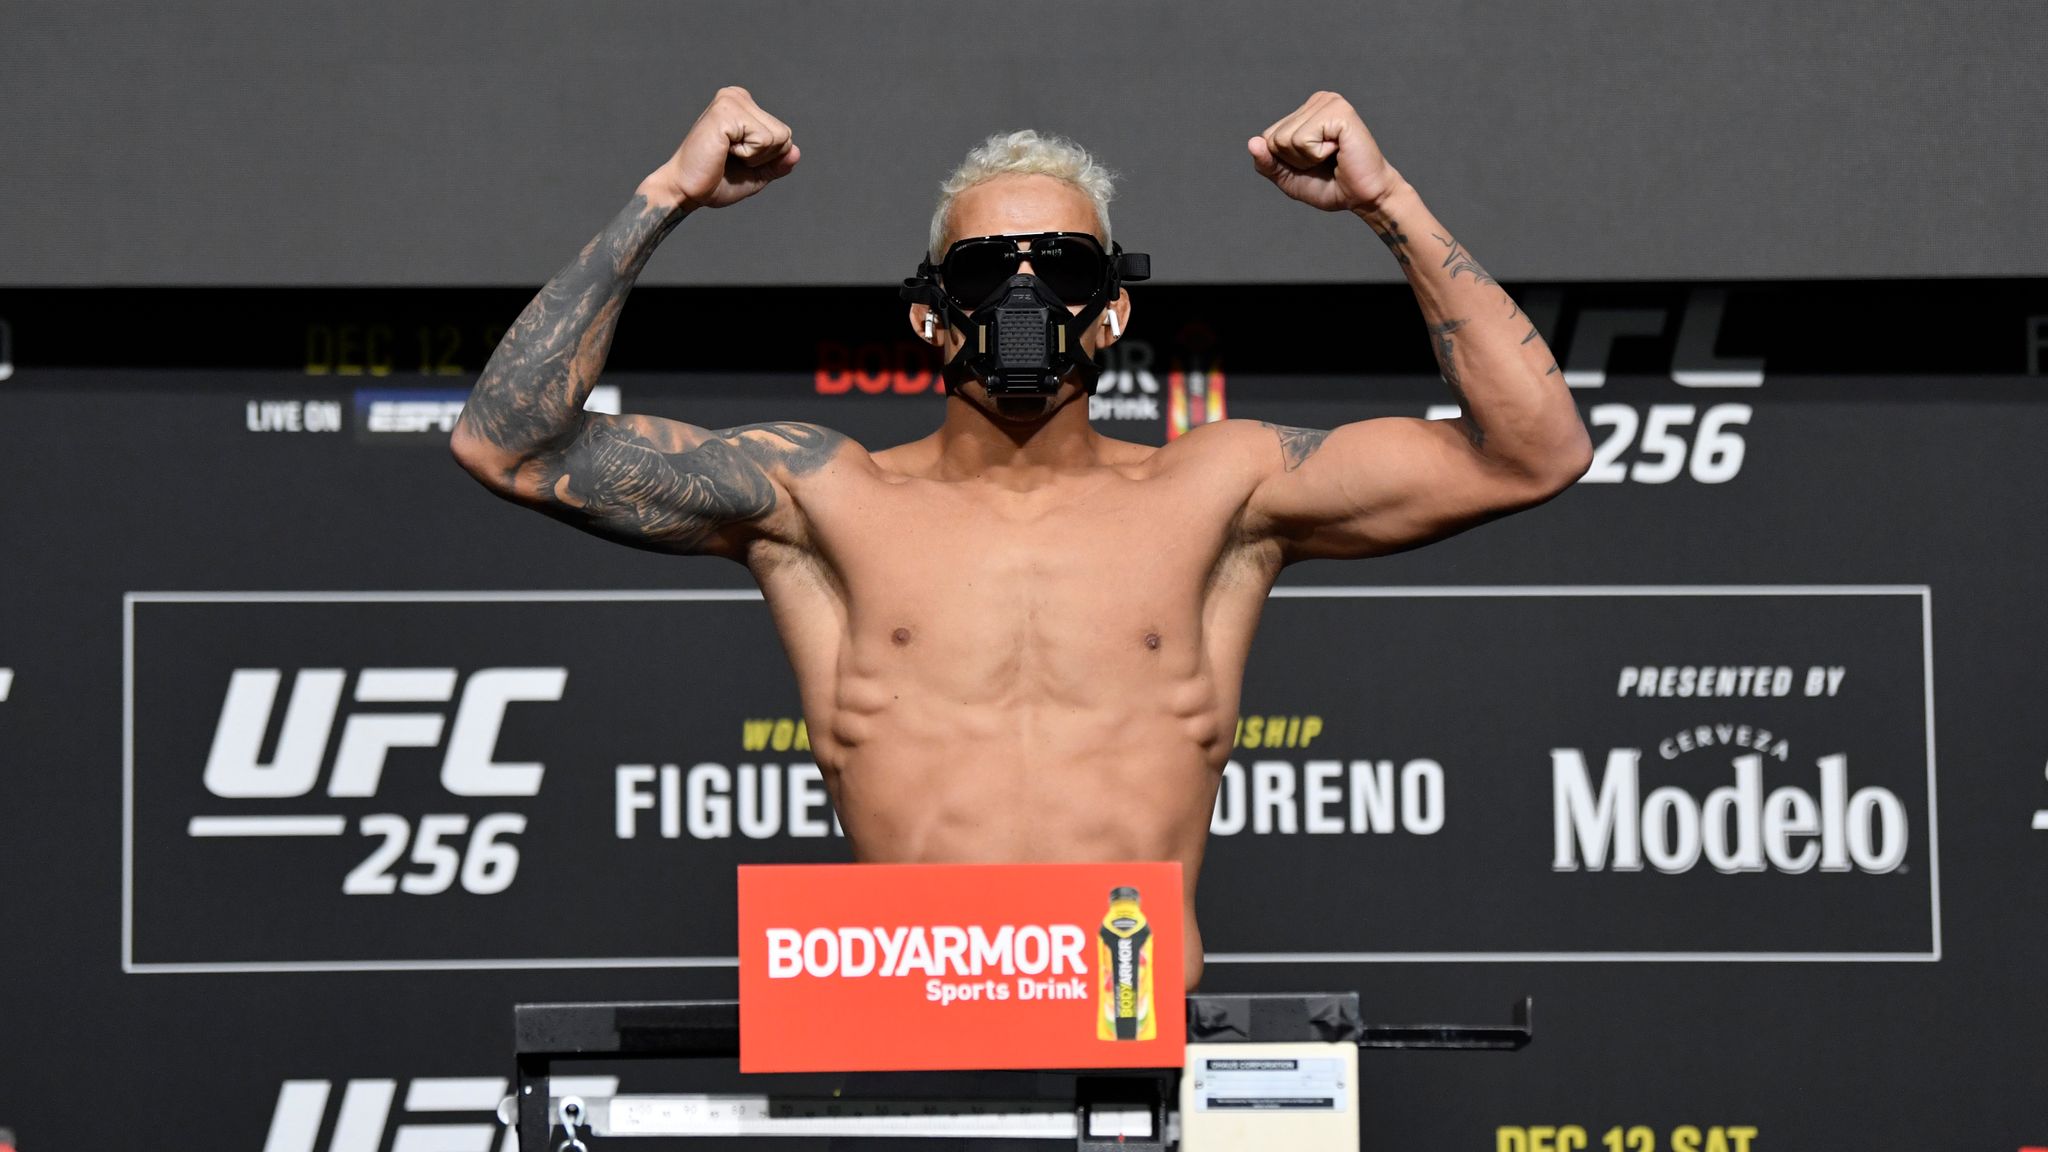 UFC: Charles Oliveira wants to face the winner of Conor McGregor vs Dustin Poirier